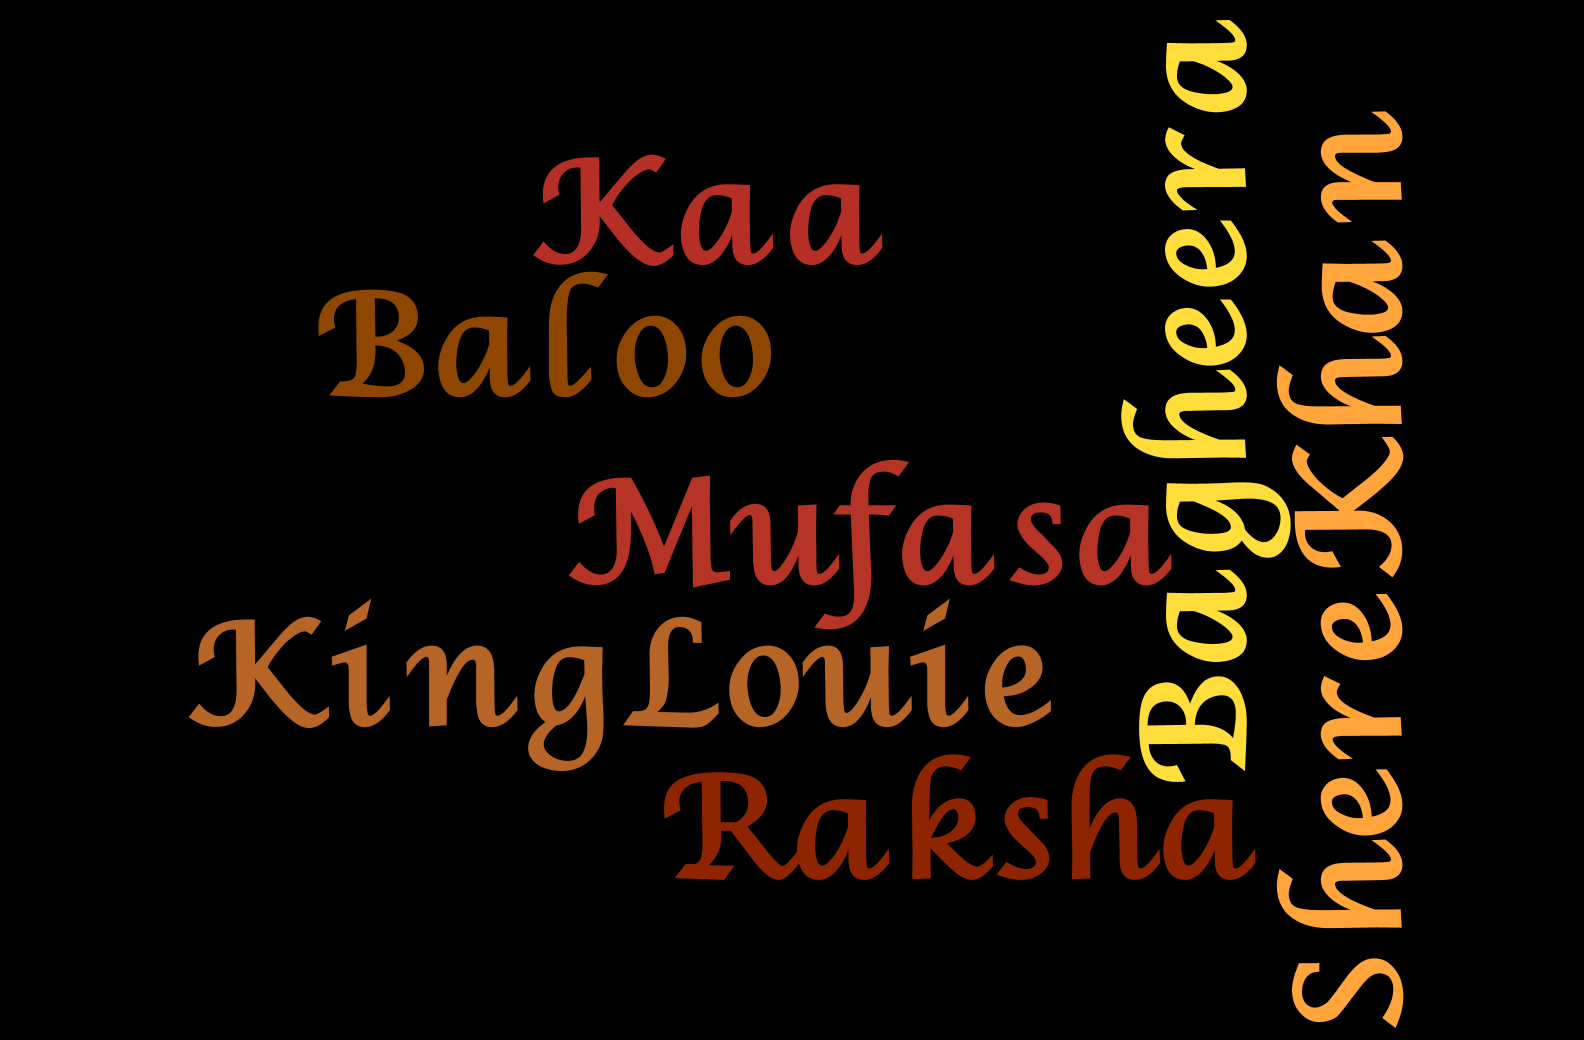 img/word_cloud_questions_3/jungle_book_2.png